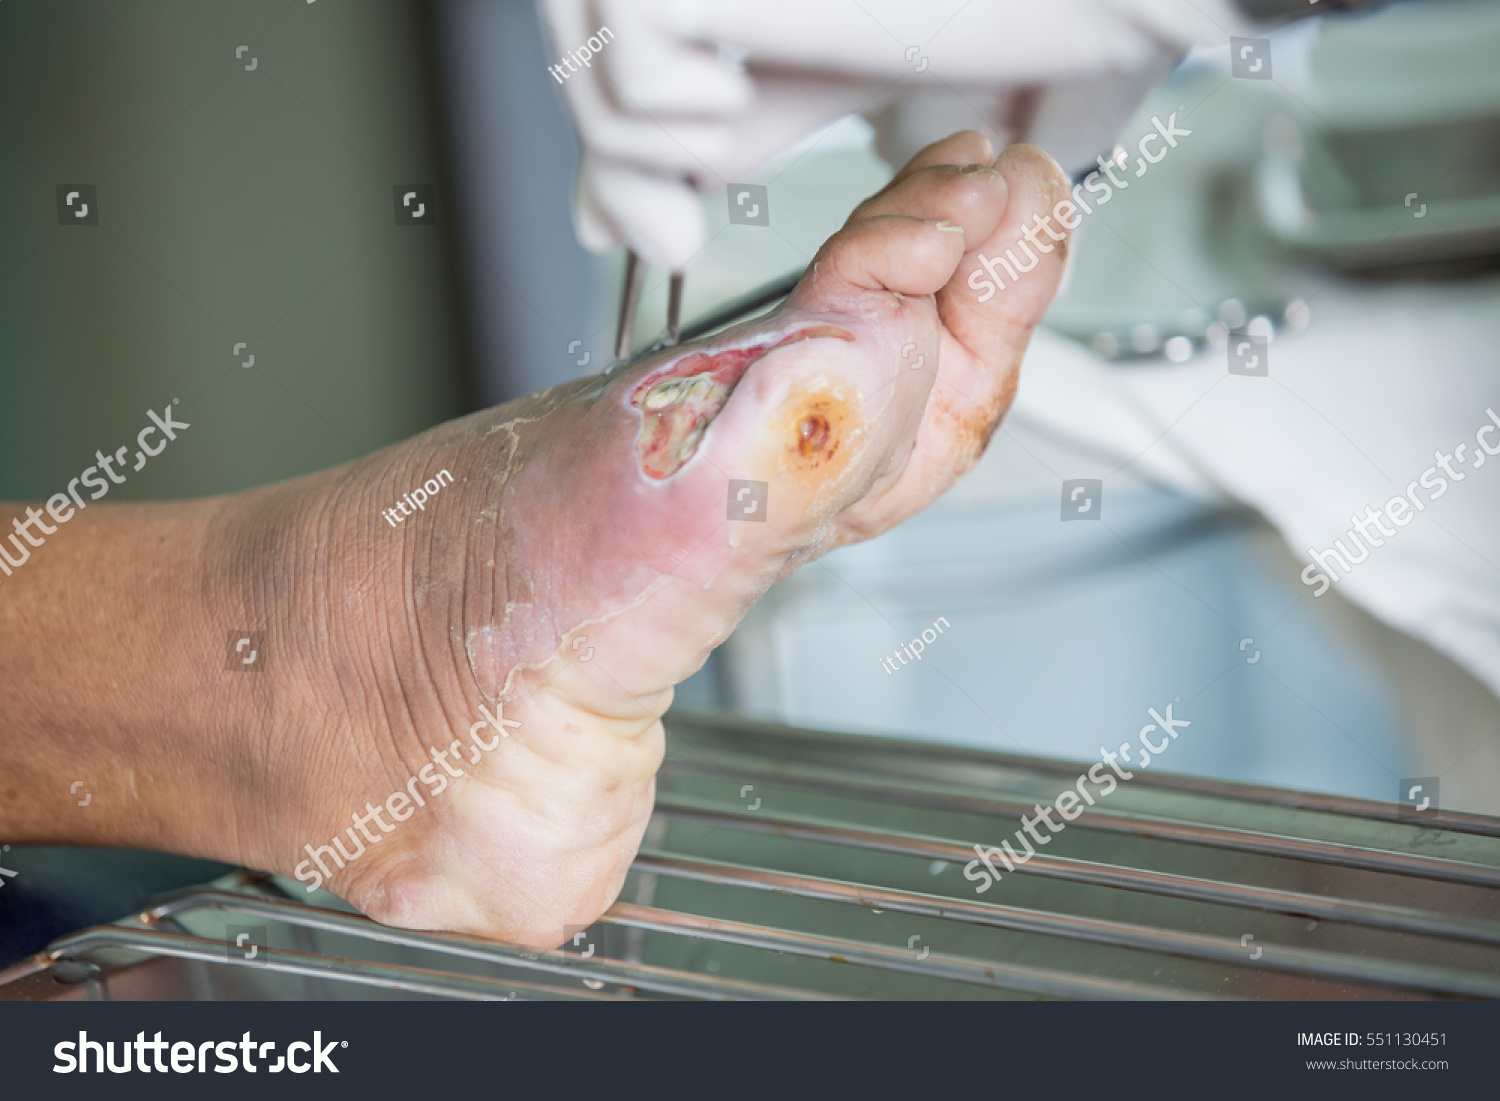 Infected Wound Of Diabetic Foot Stock Photo 551130451 : Shutterstock